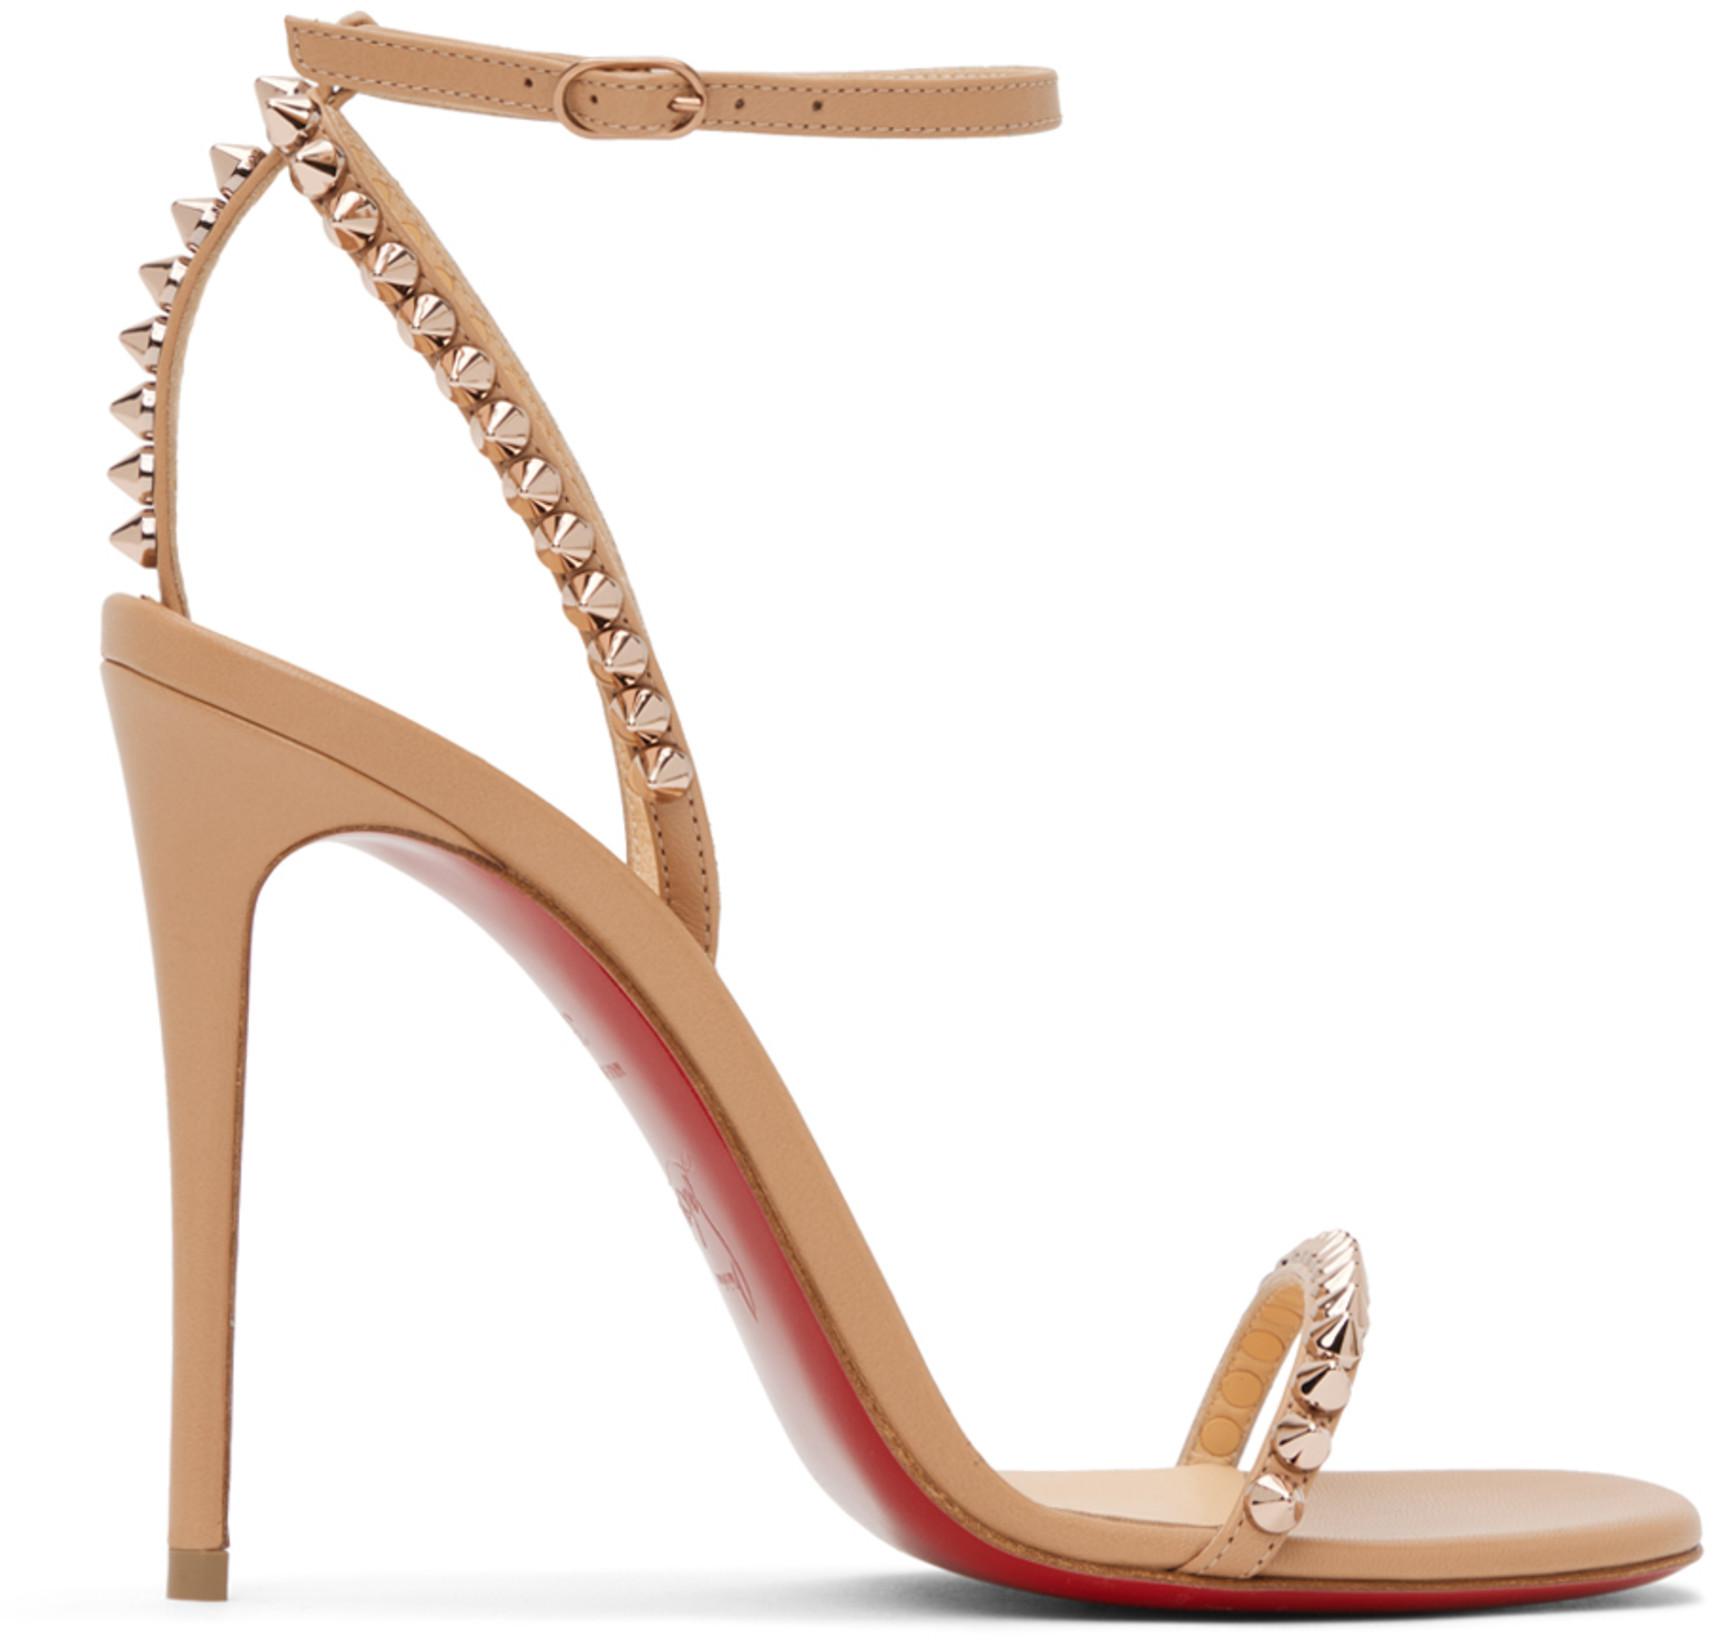 Beige So Me 100 Heeled Sandals by CHRISTIAN LOUBOUTIN